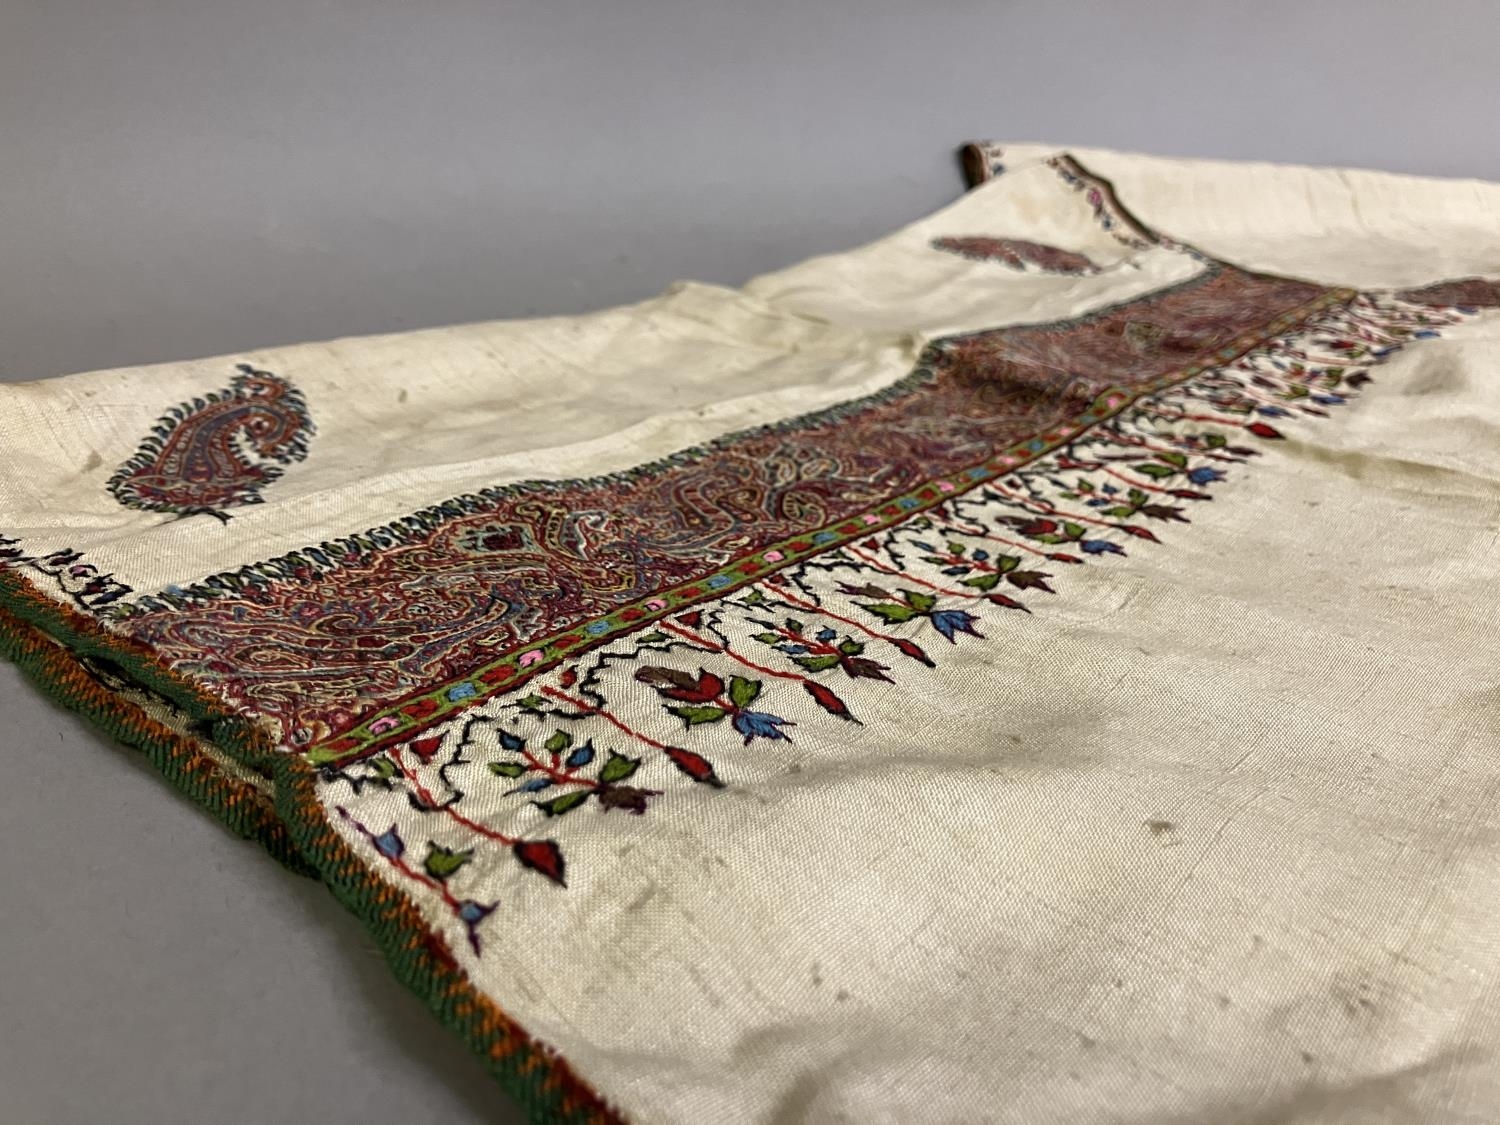 Indo-Persian textiles: a selection of good embroidered textiles from the 9th century and possibly - Image 3 of 4